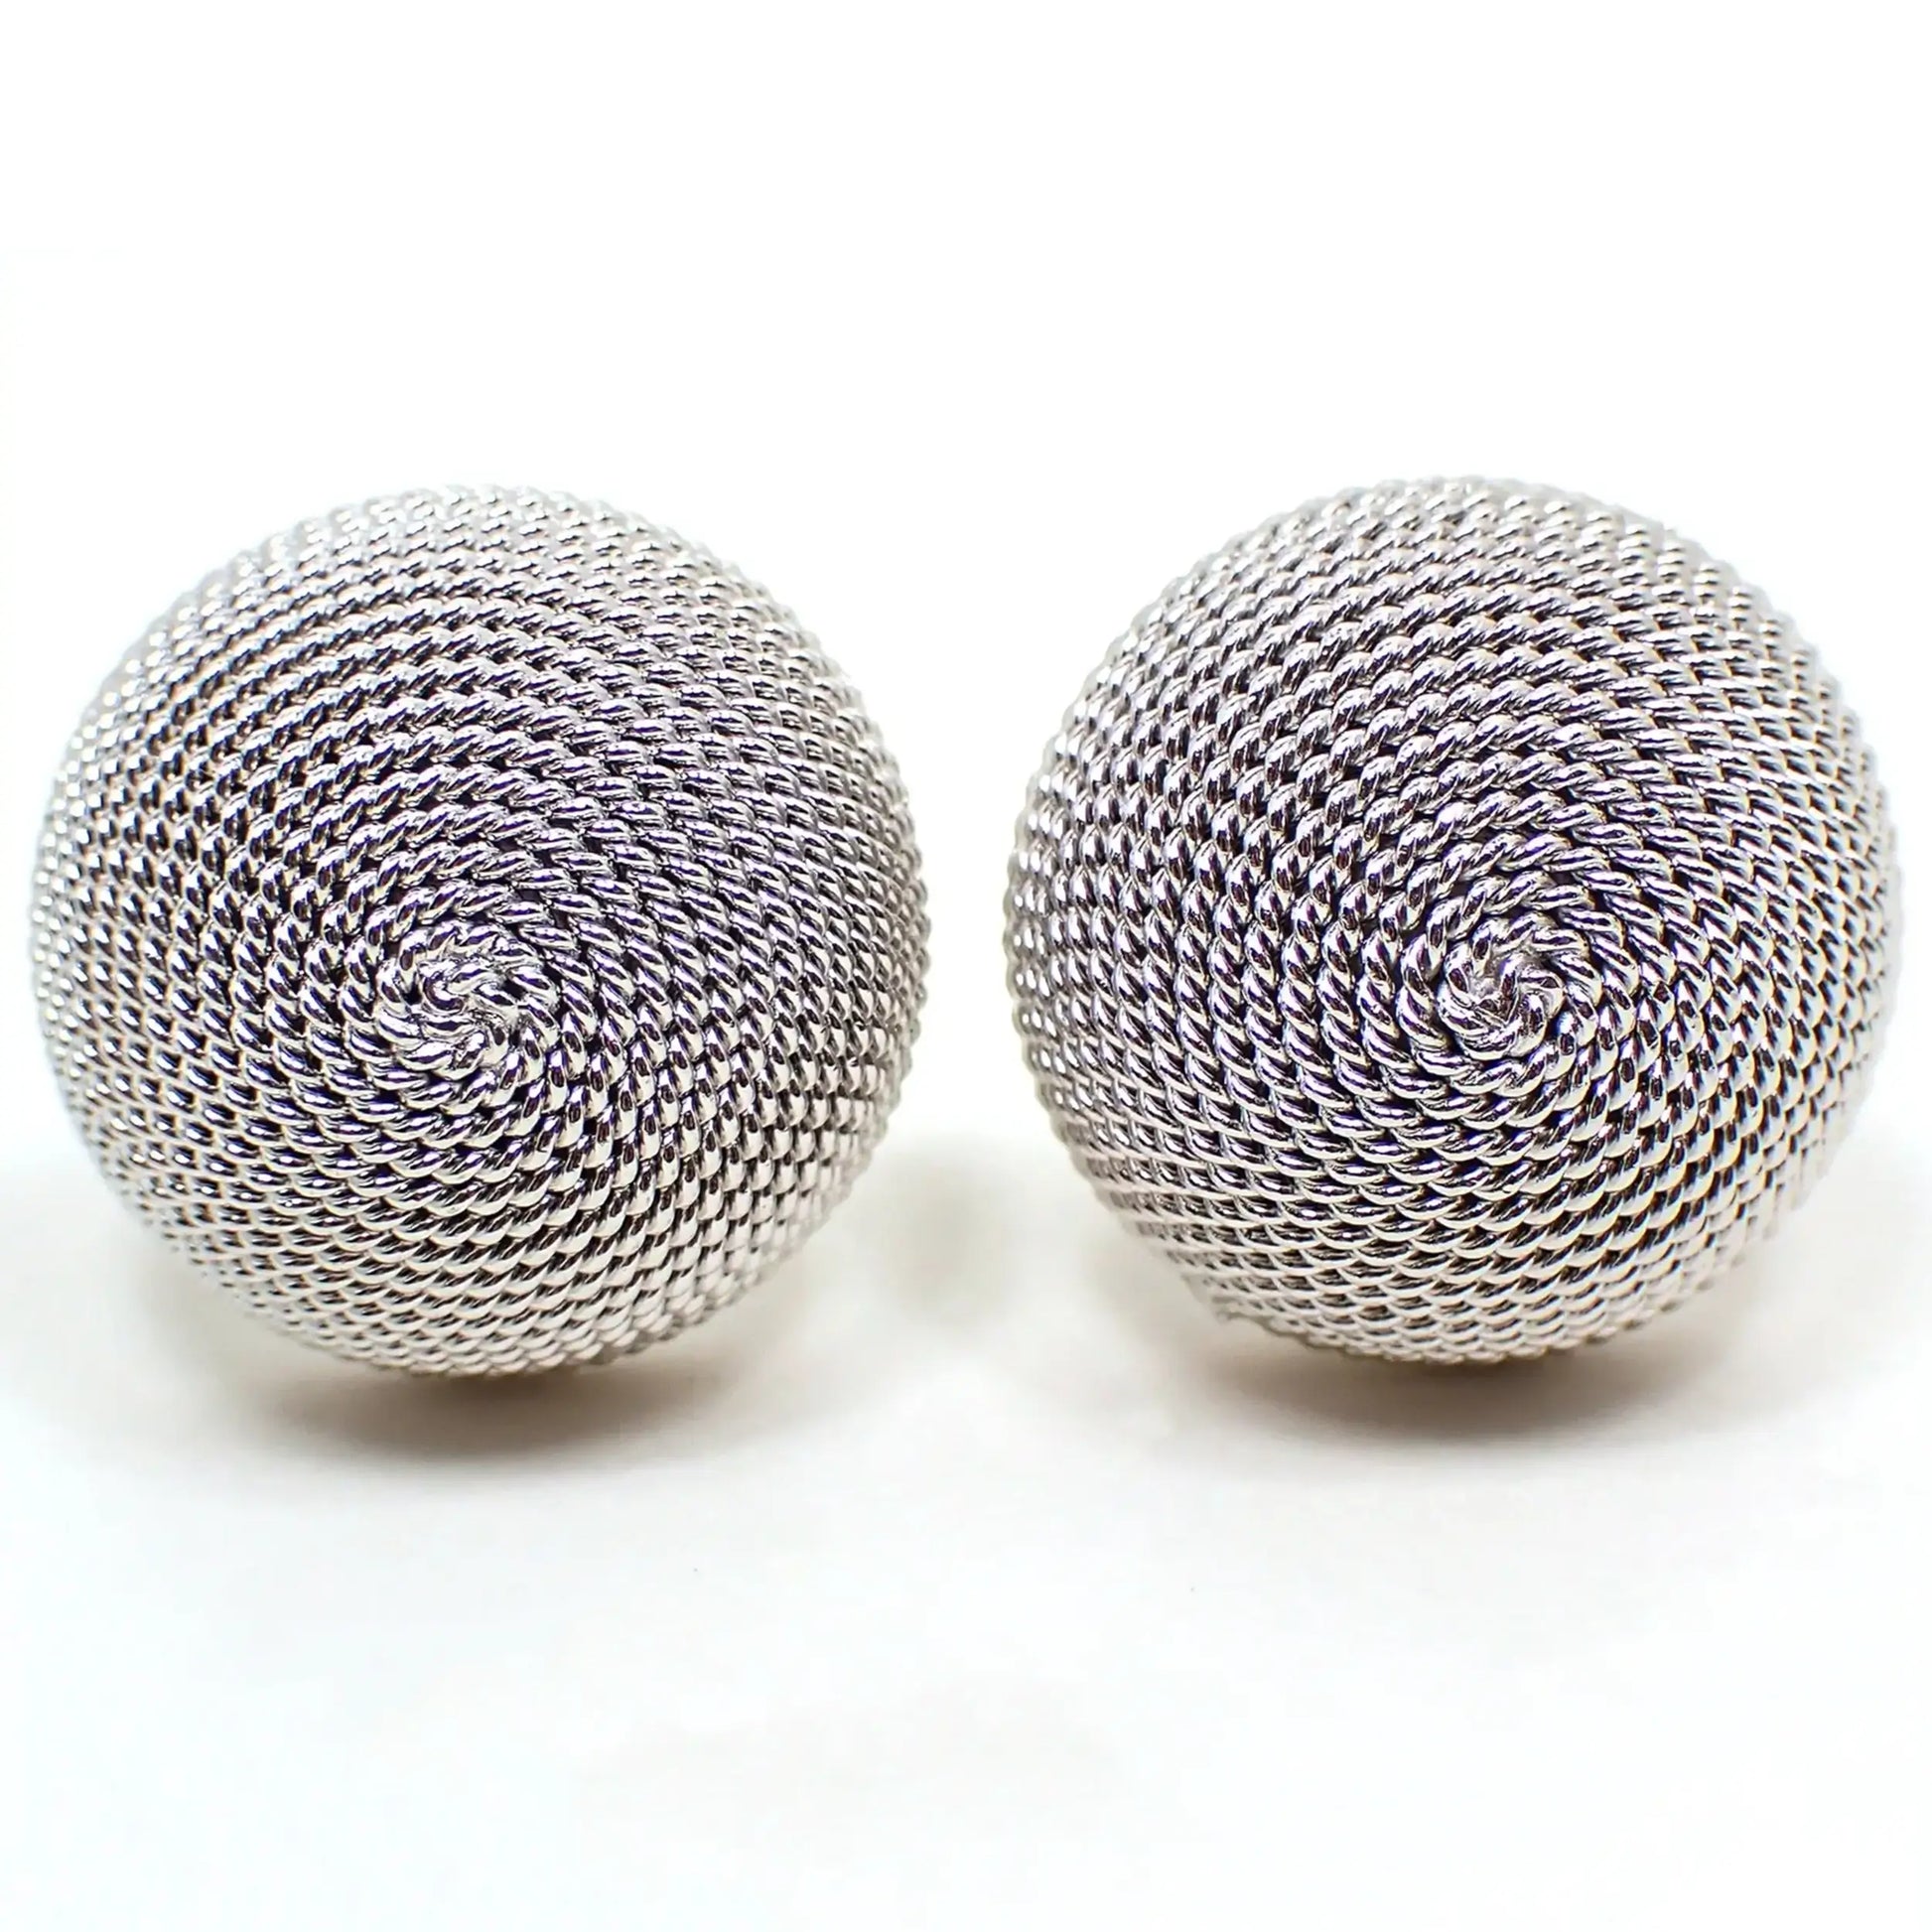 Enlarged front view of the retro vintage Shields cufflinks. They are round domed and silver tone in color. There is a twisted textured pattern that spirals around covering the fronts of the cufflinks.